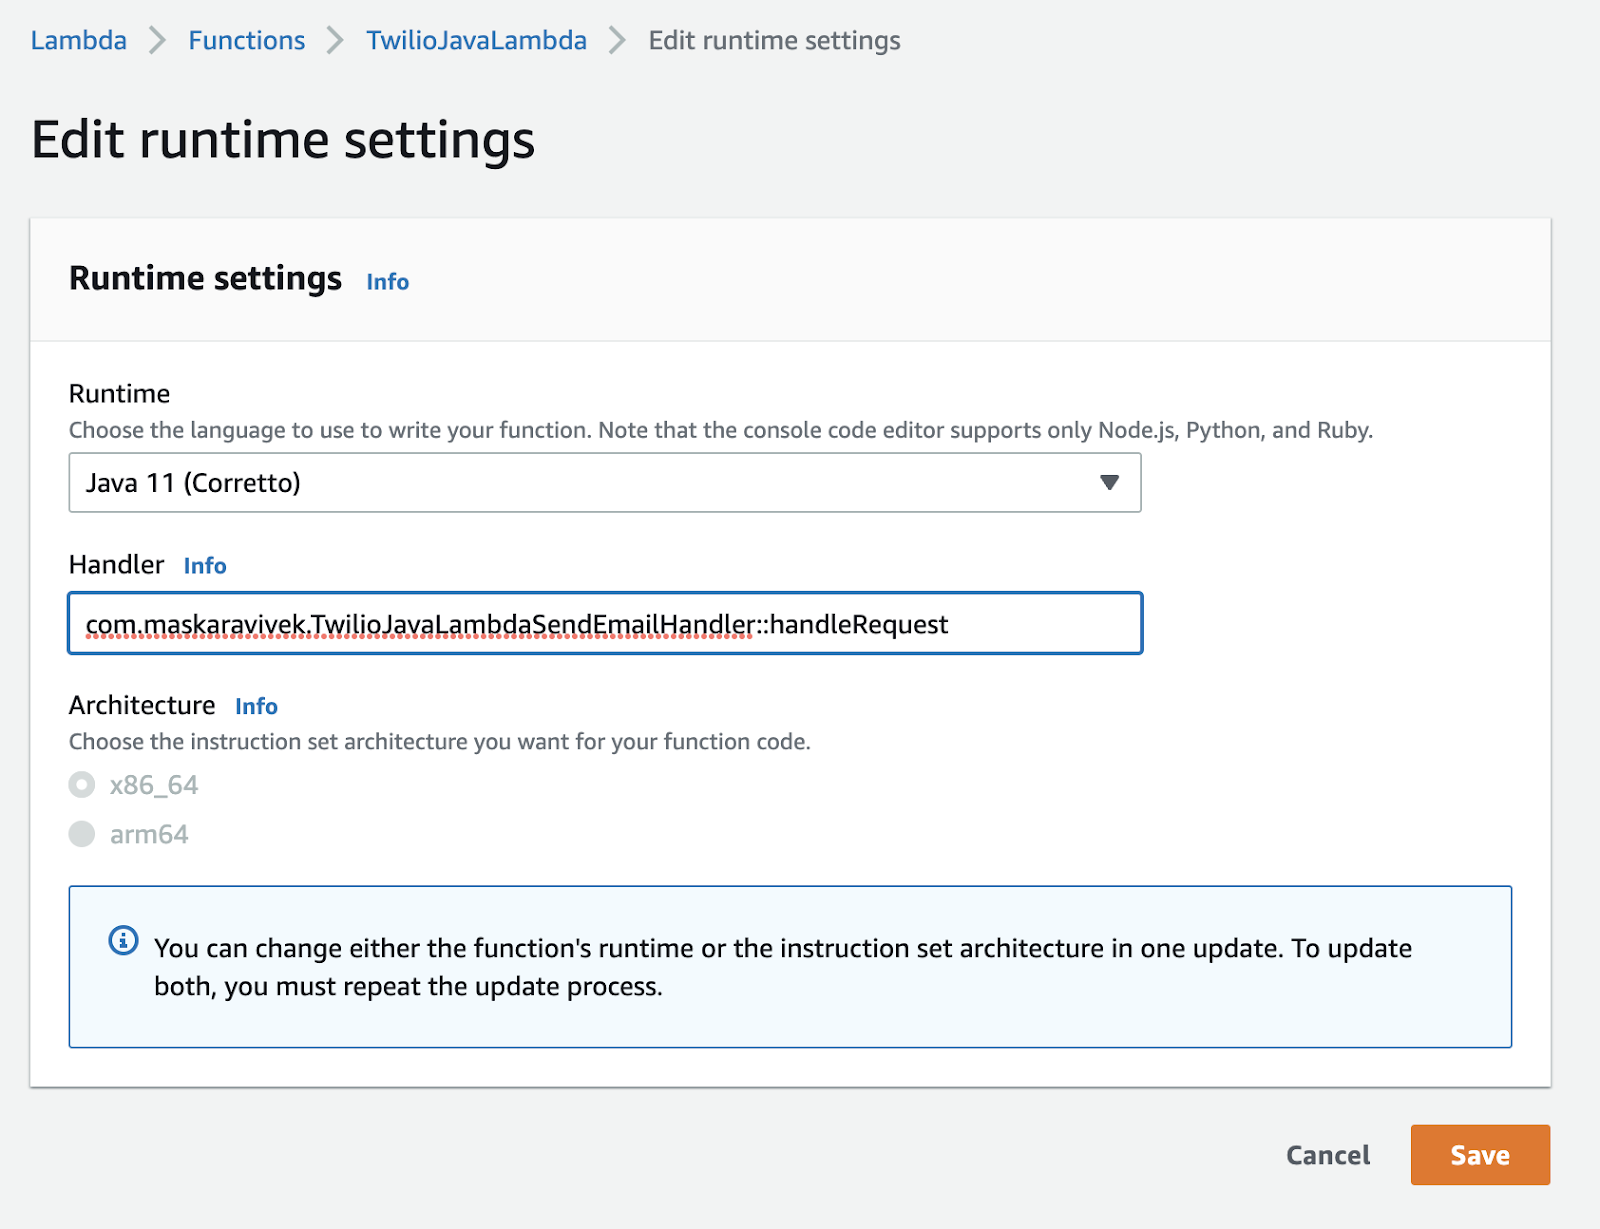 Update runtime settings for the AWS Lambda function